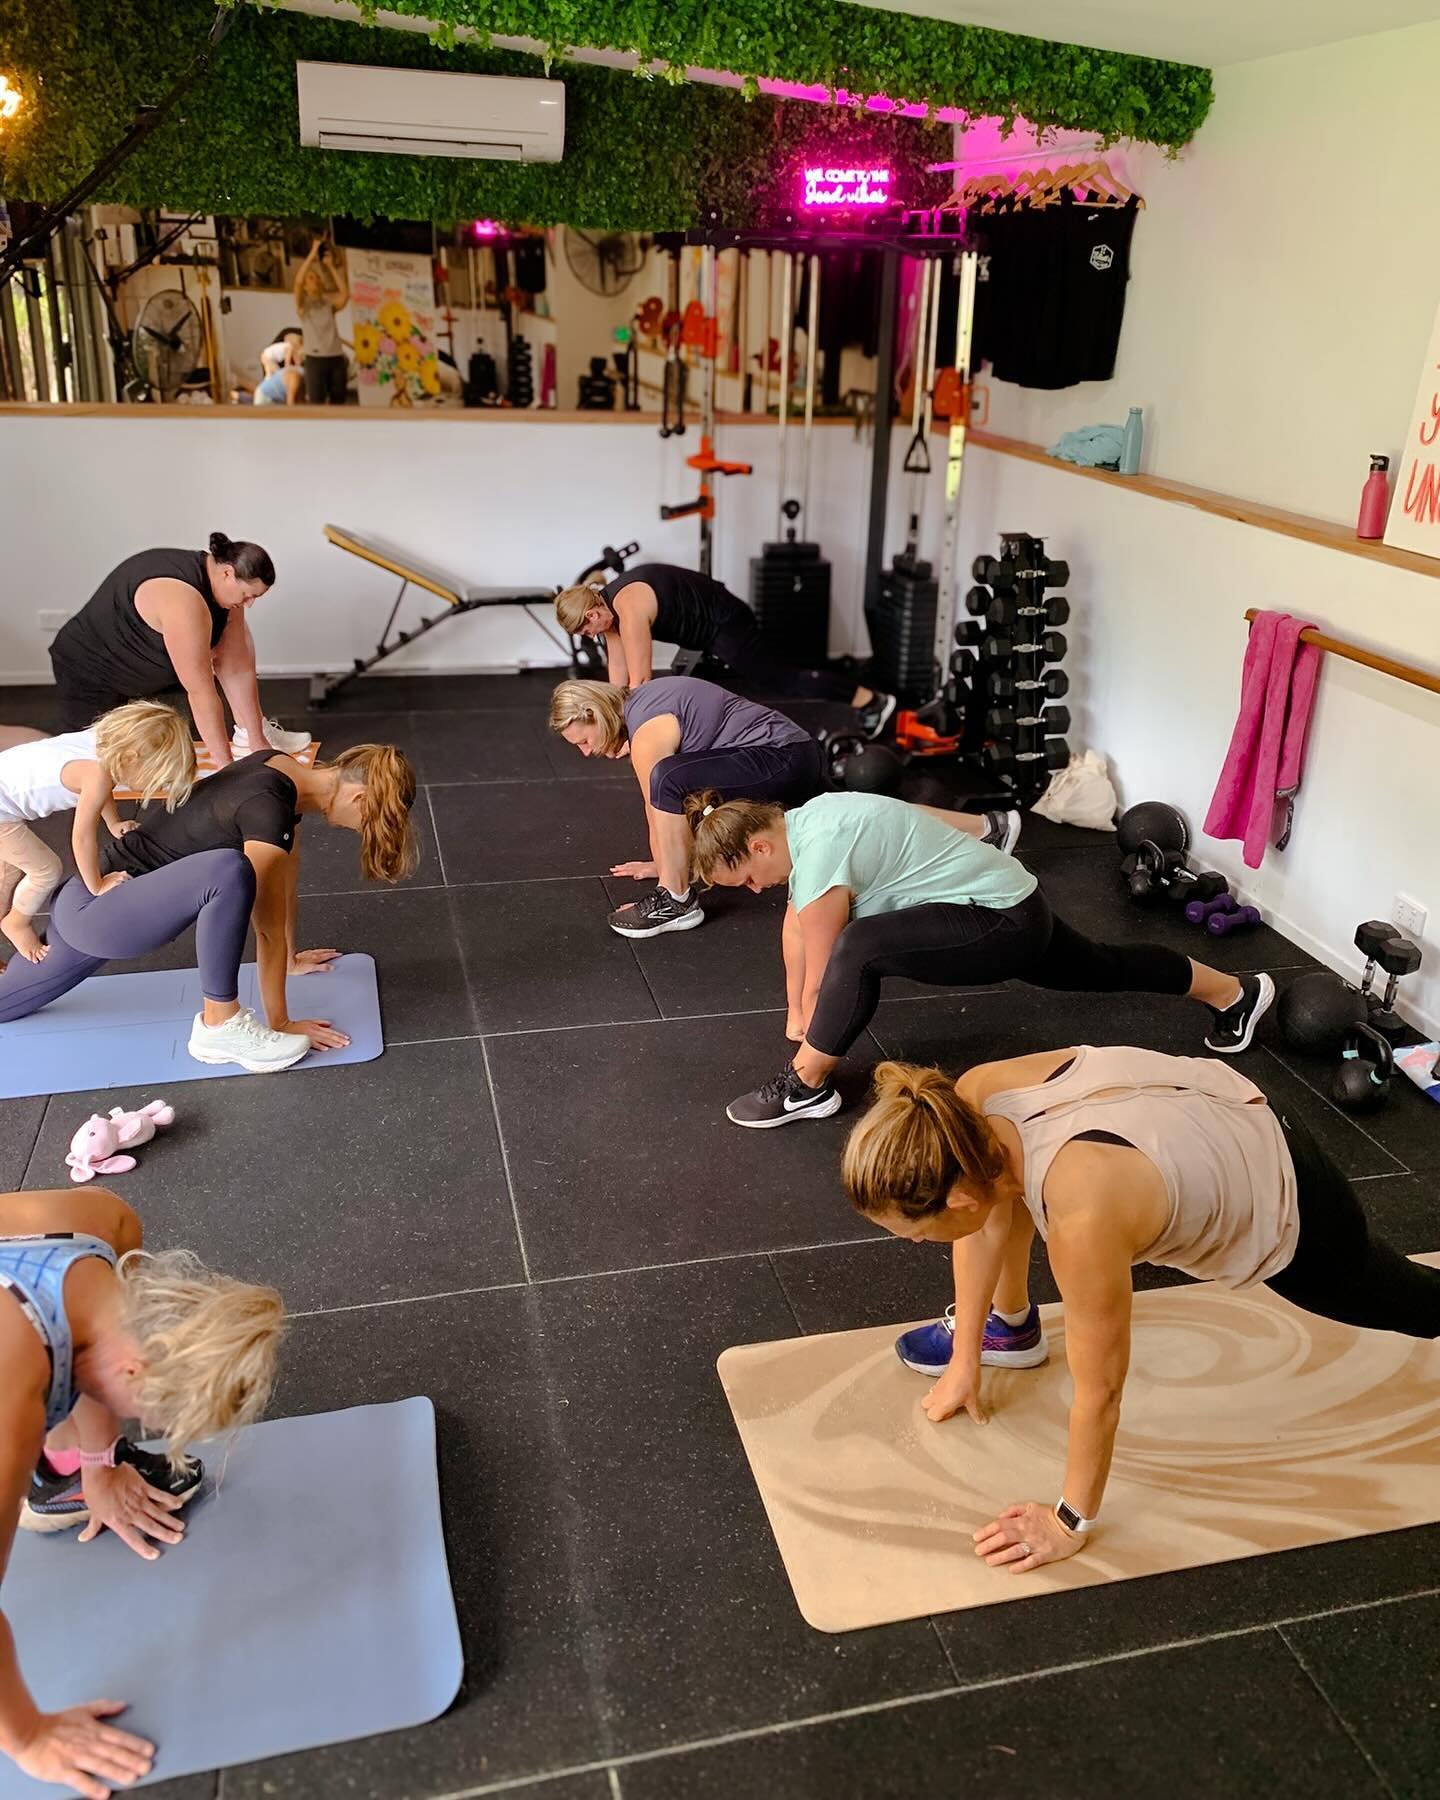 Community that INSPIRES.

Strength that EMPOWERS.

A choice that TRANSFORMS. 

Here at Elliott&rsquo;s PT we build each other up. We conquer challenging workouts and we do it TOGETHER! 

Come see what we are about! Check out our intro session for $50